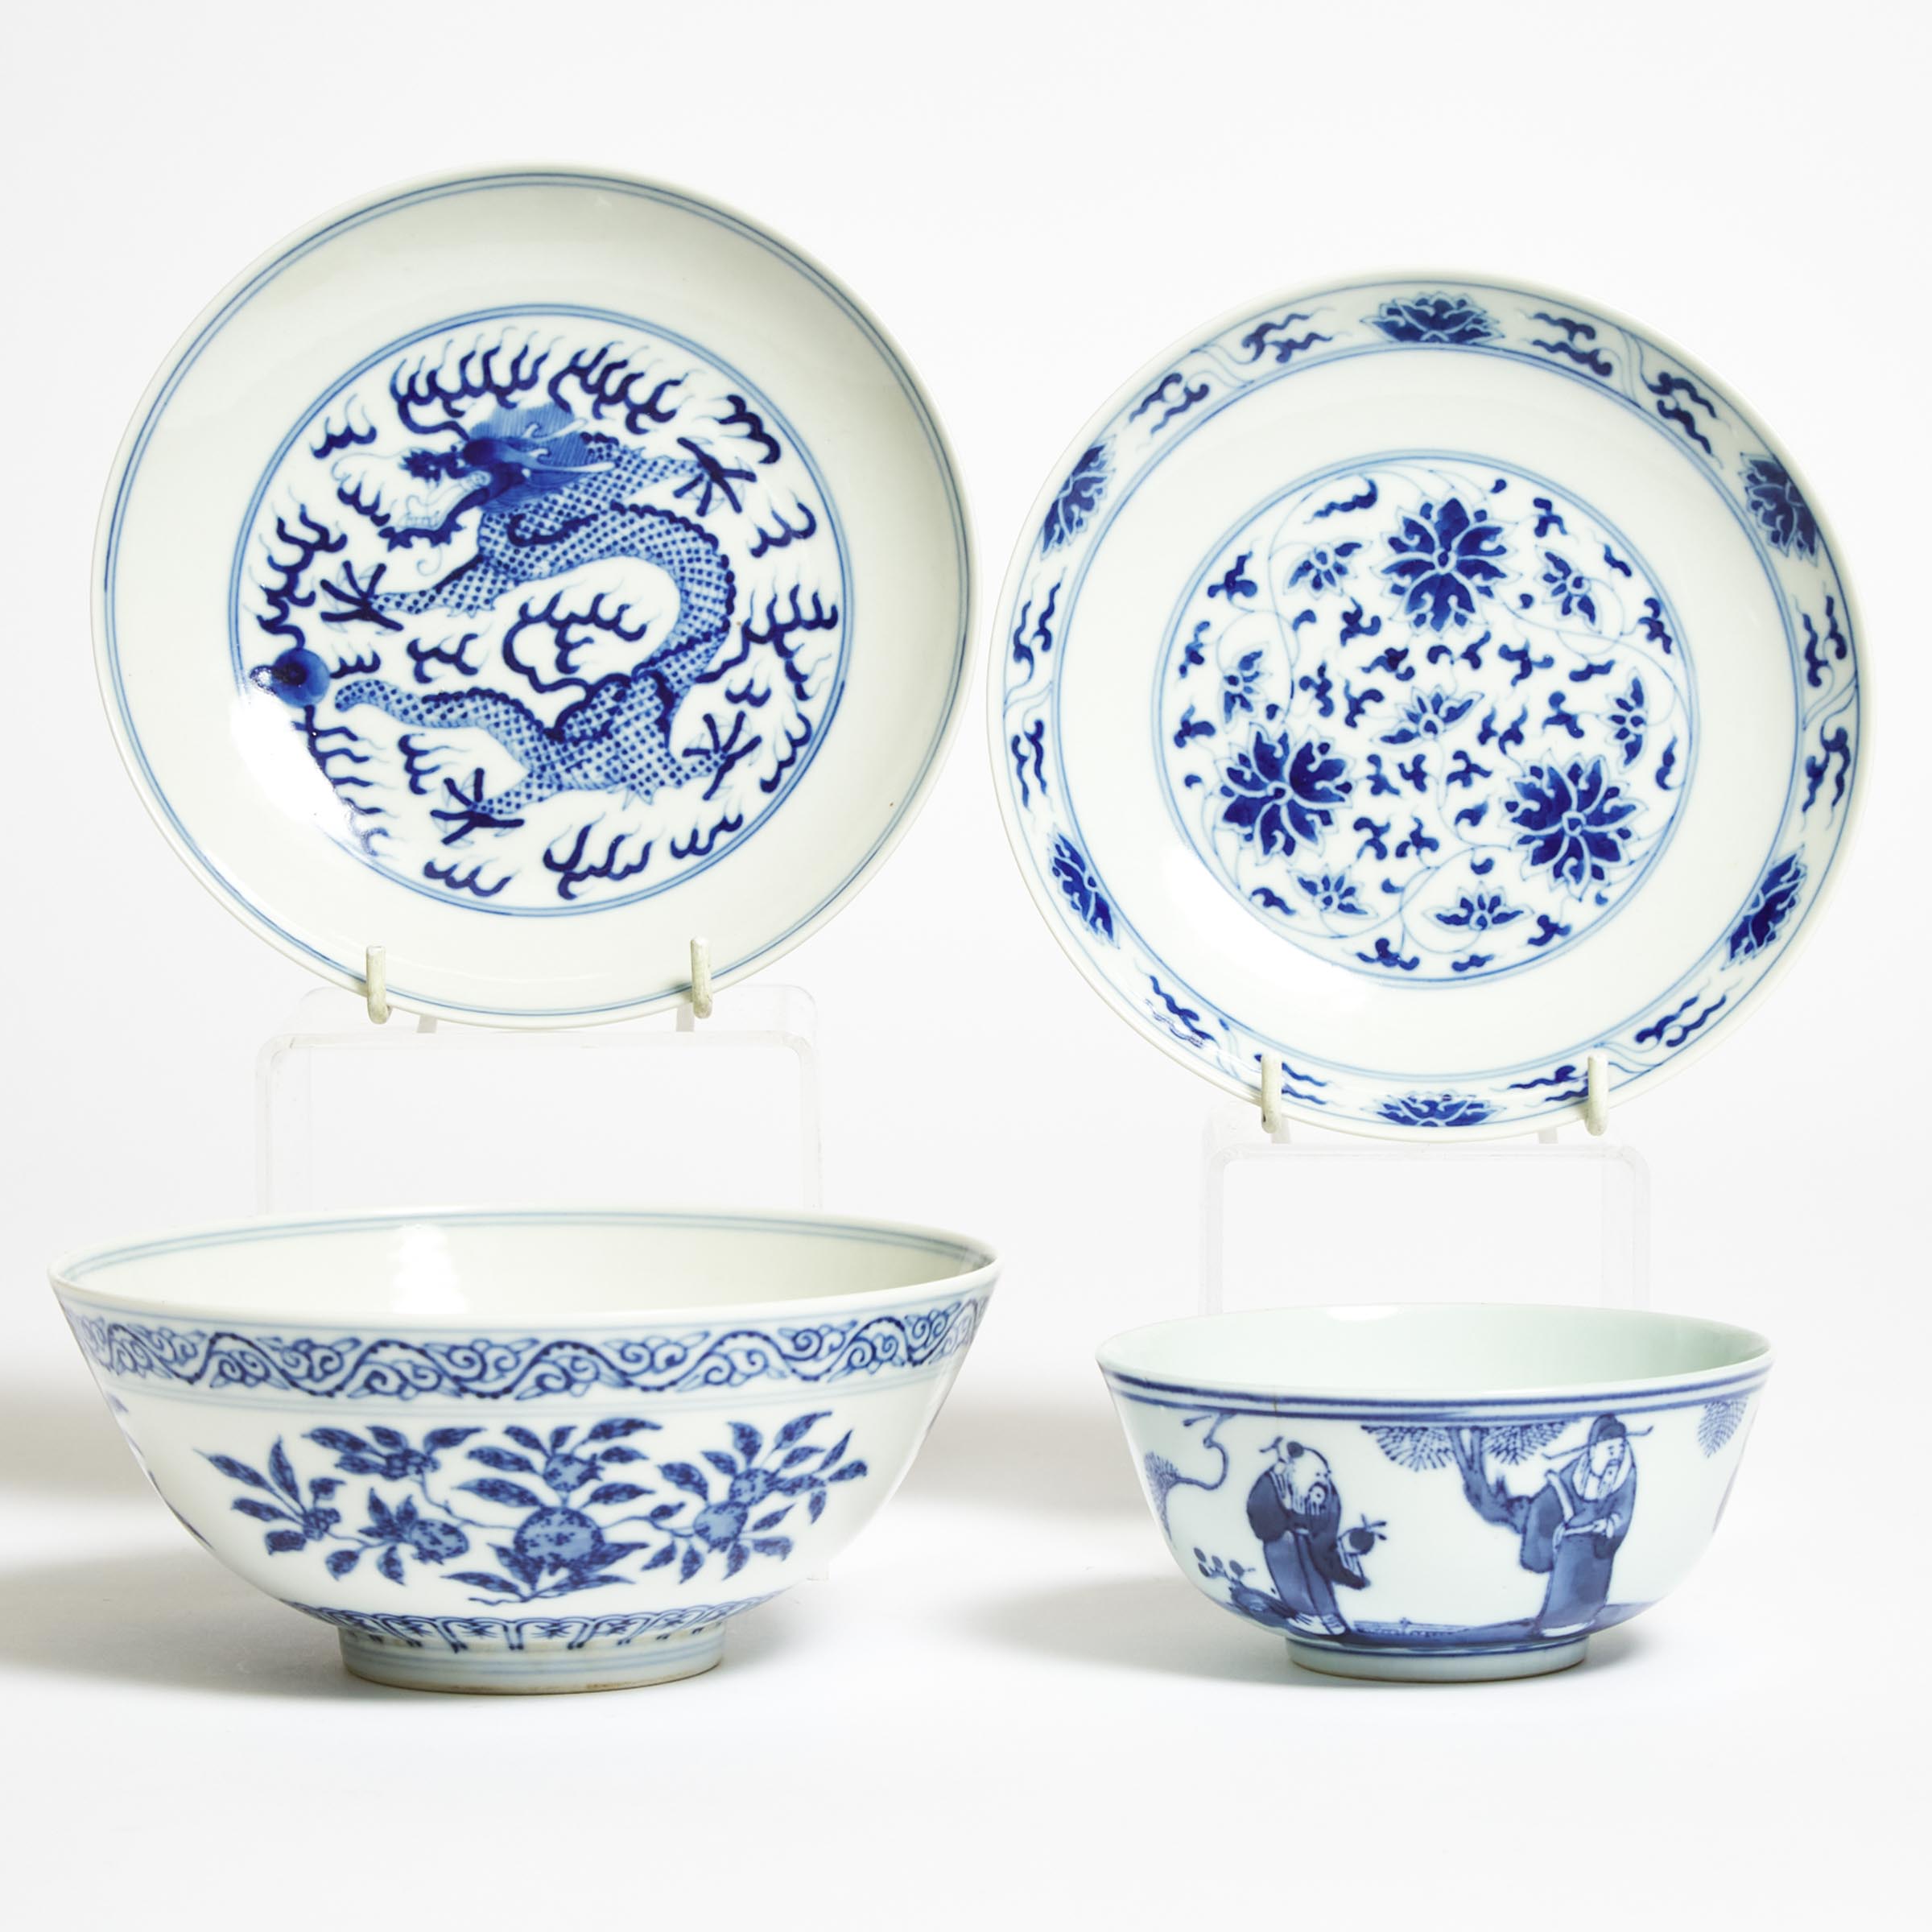 A Group of Four Blue and White Porcelain Wares